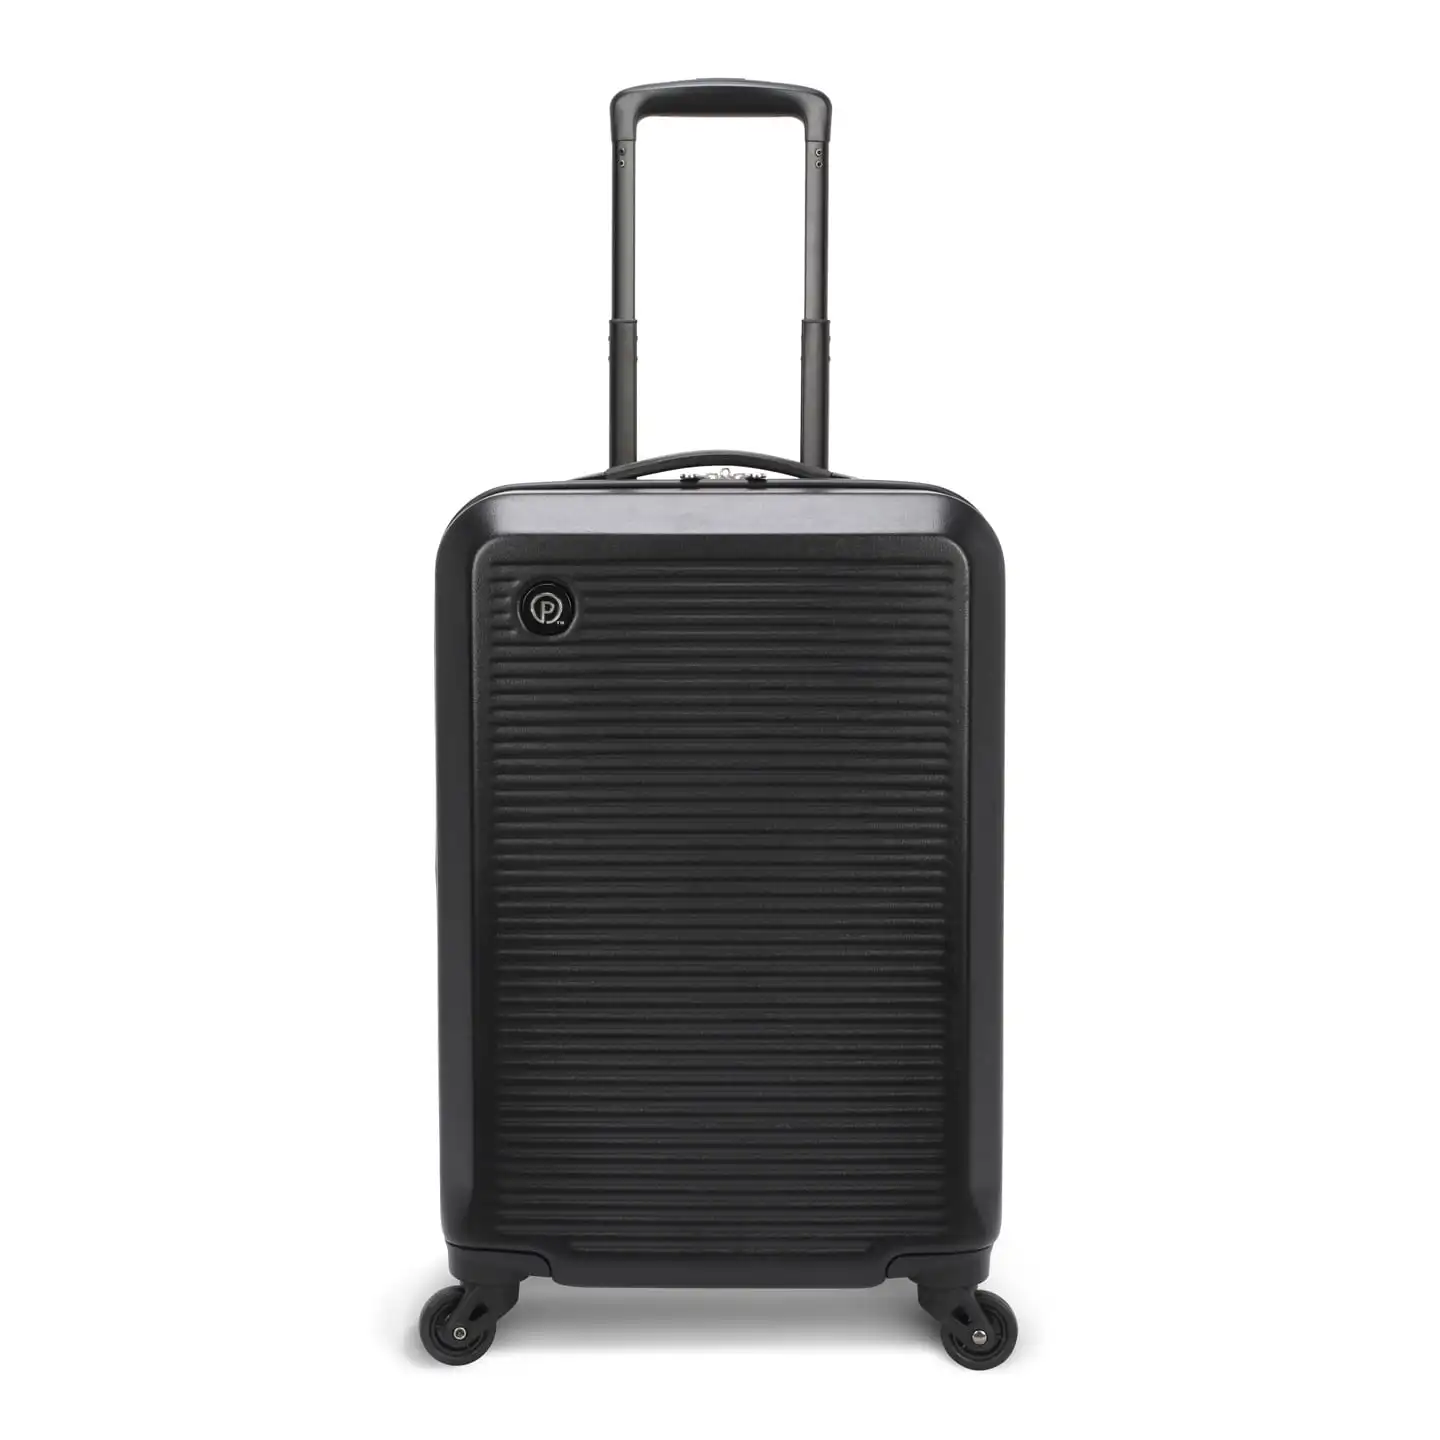 

Protege 20 inch Hard Side Carry-On Spinner Luggage, Black Matte Finish (Walmart.com Exclusive)